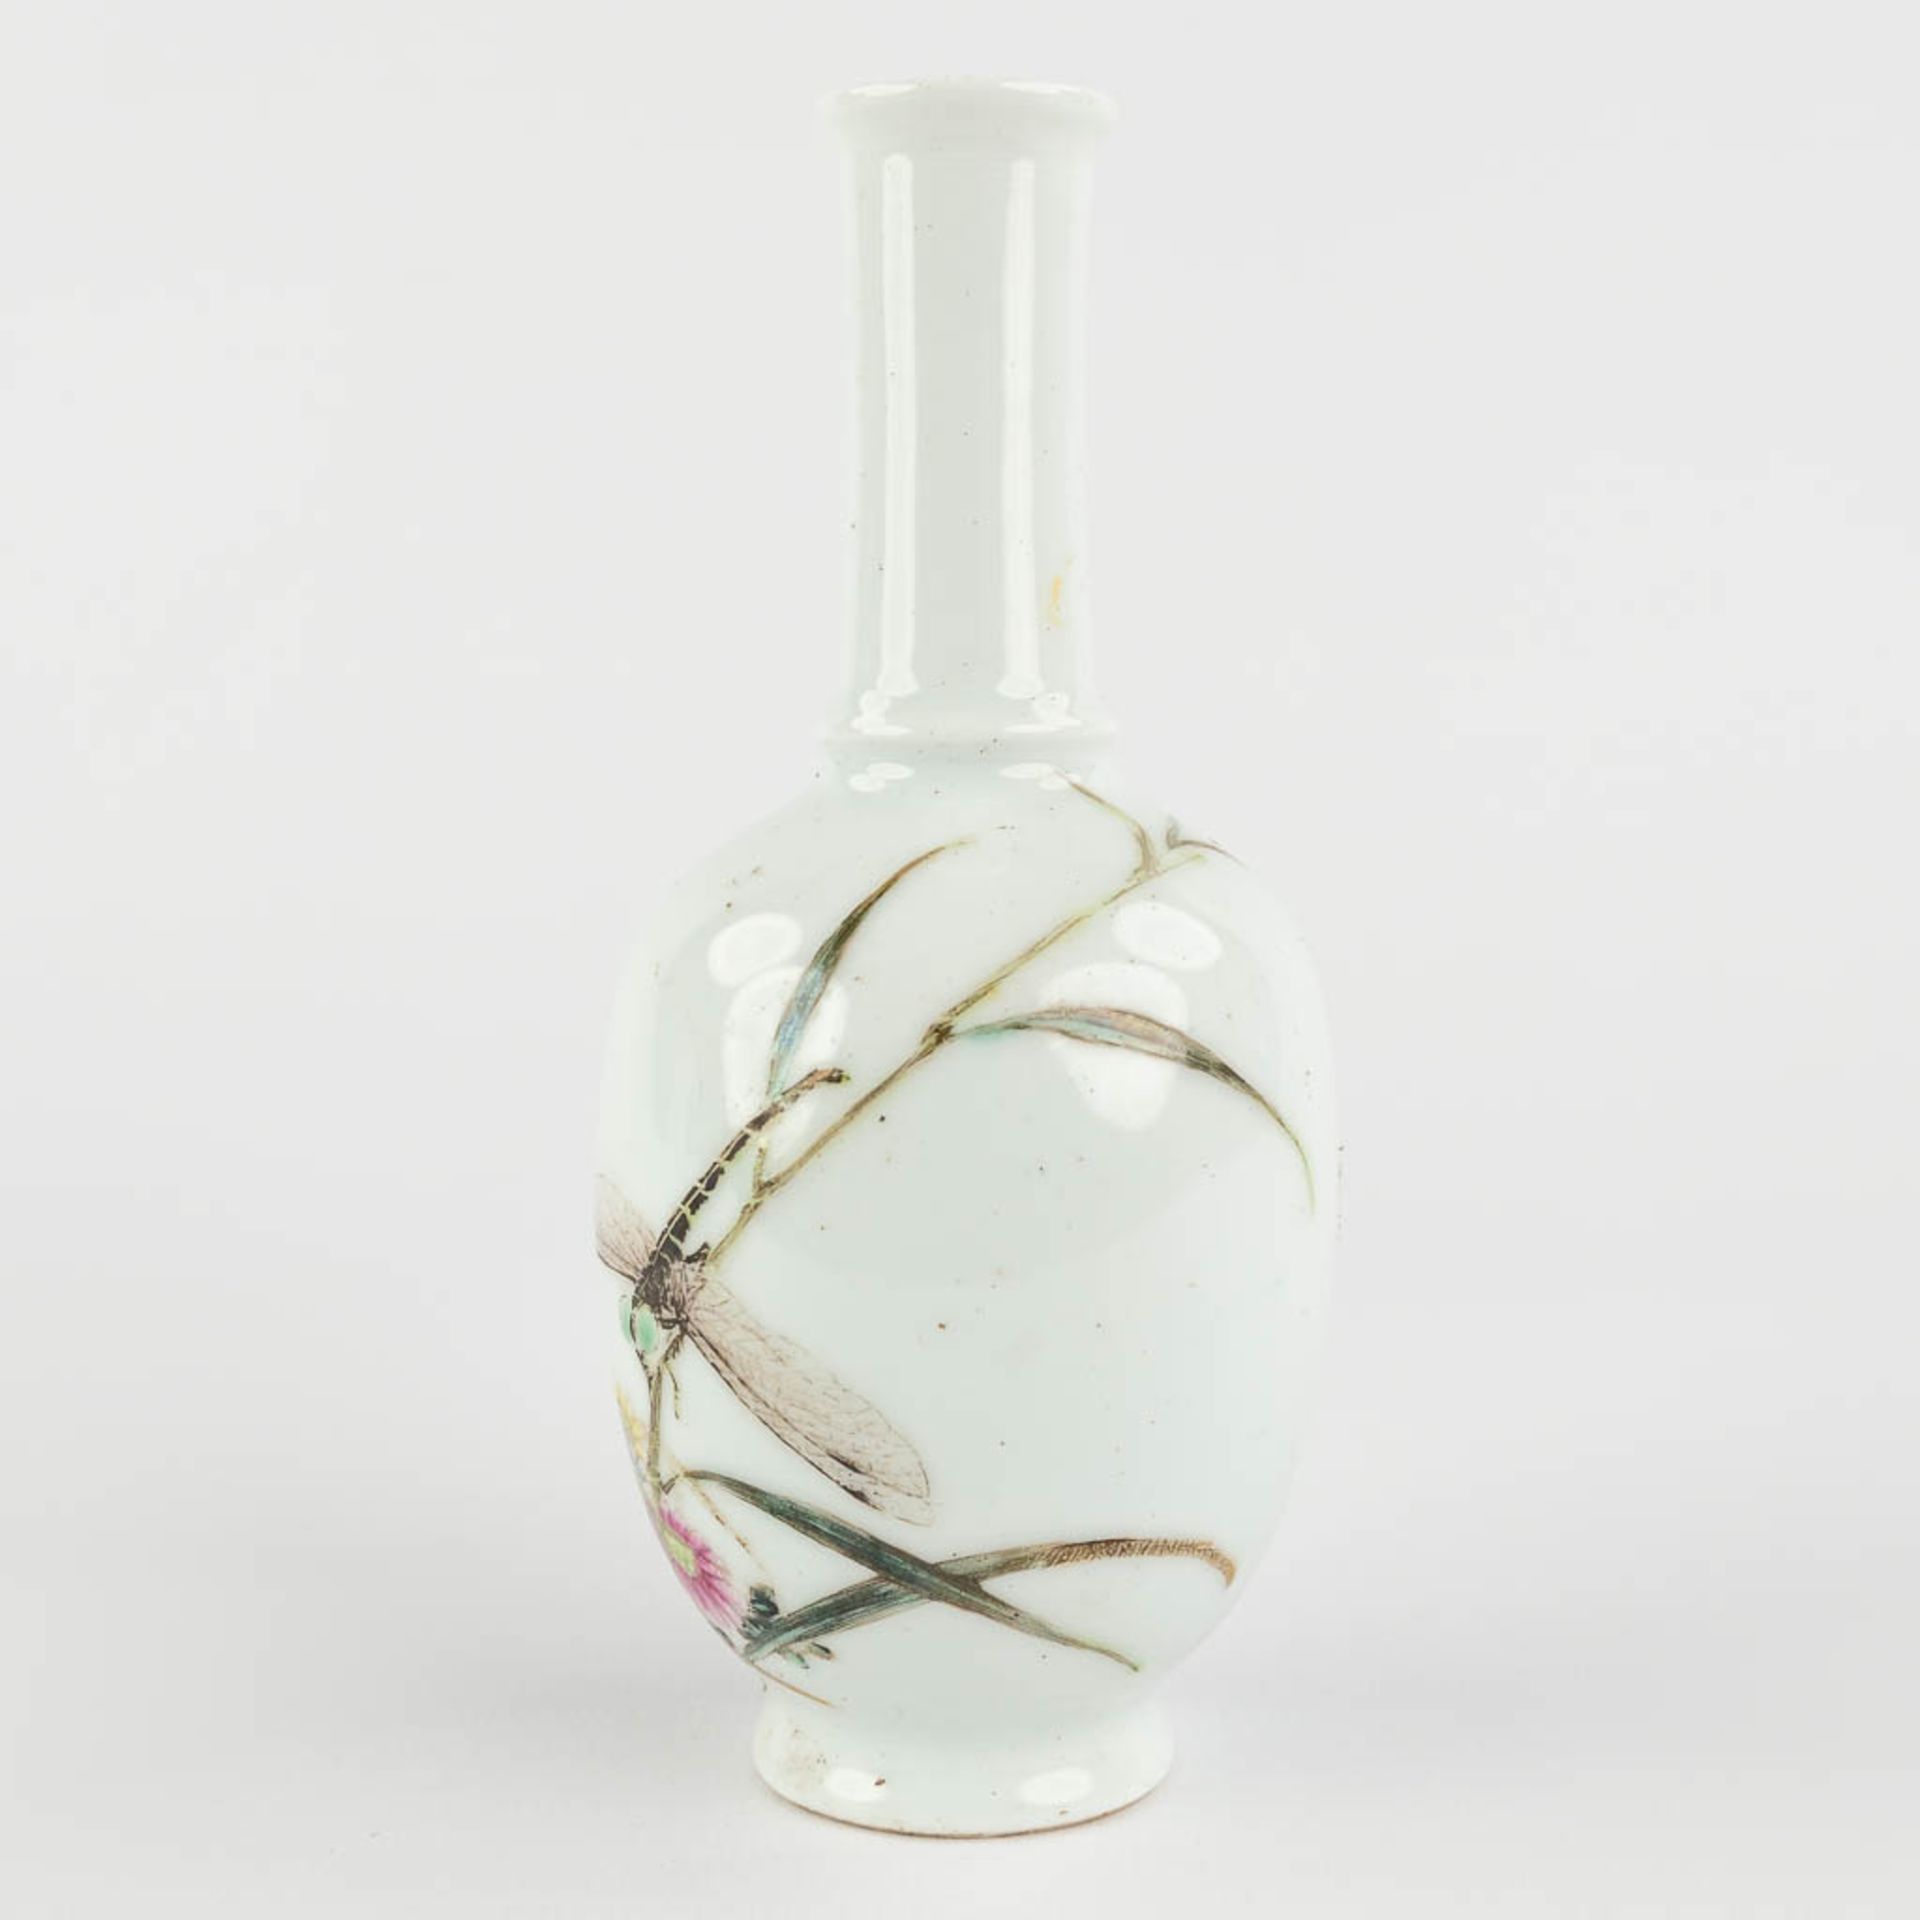 Li mingliang, A Chinese vase with decor of a dragonfly. 20th C. (H:14 x D:6,5 cm) - Bild 7 aus 9